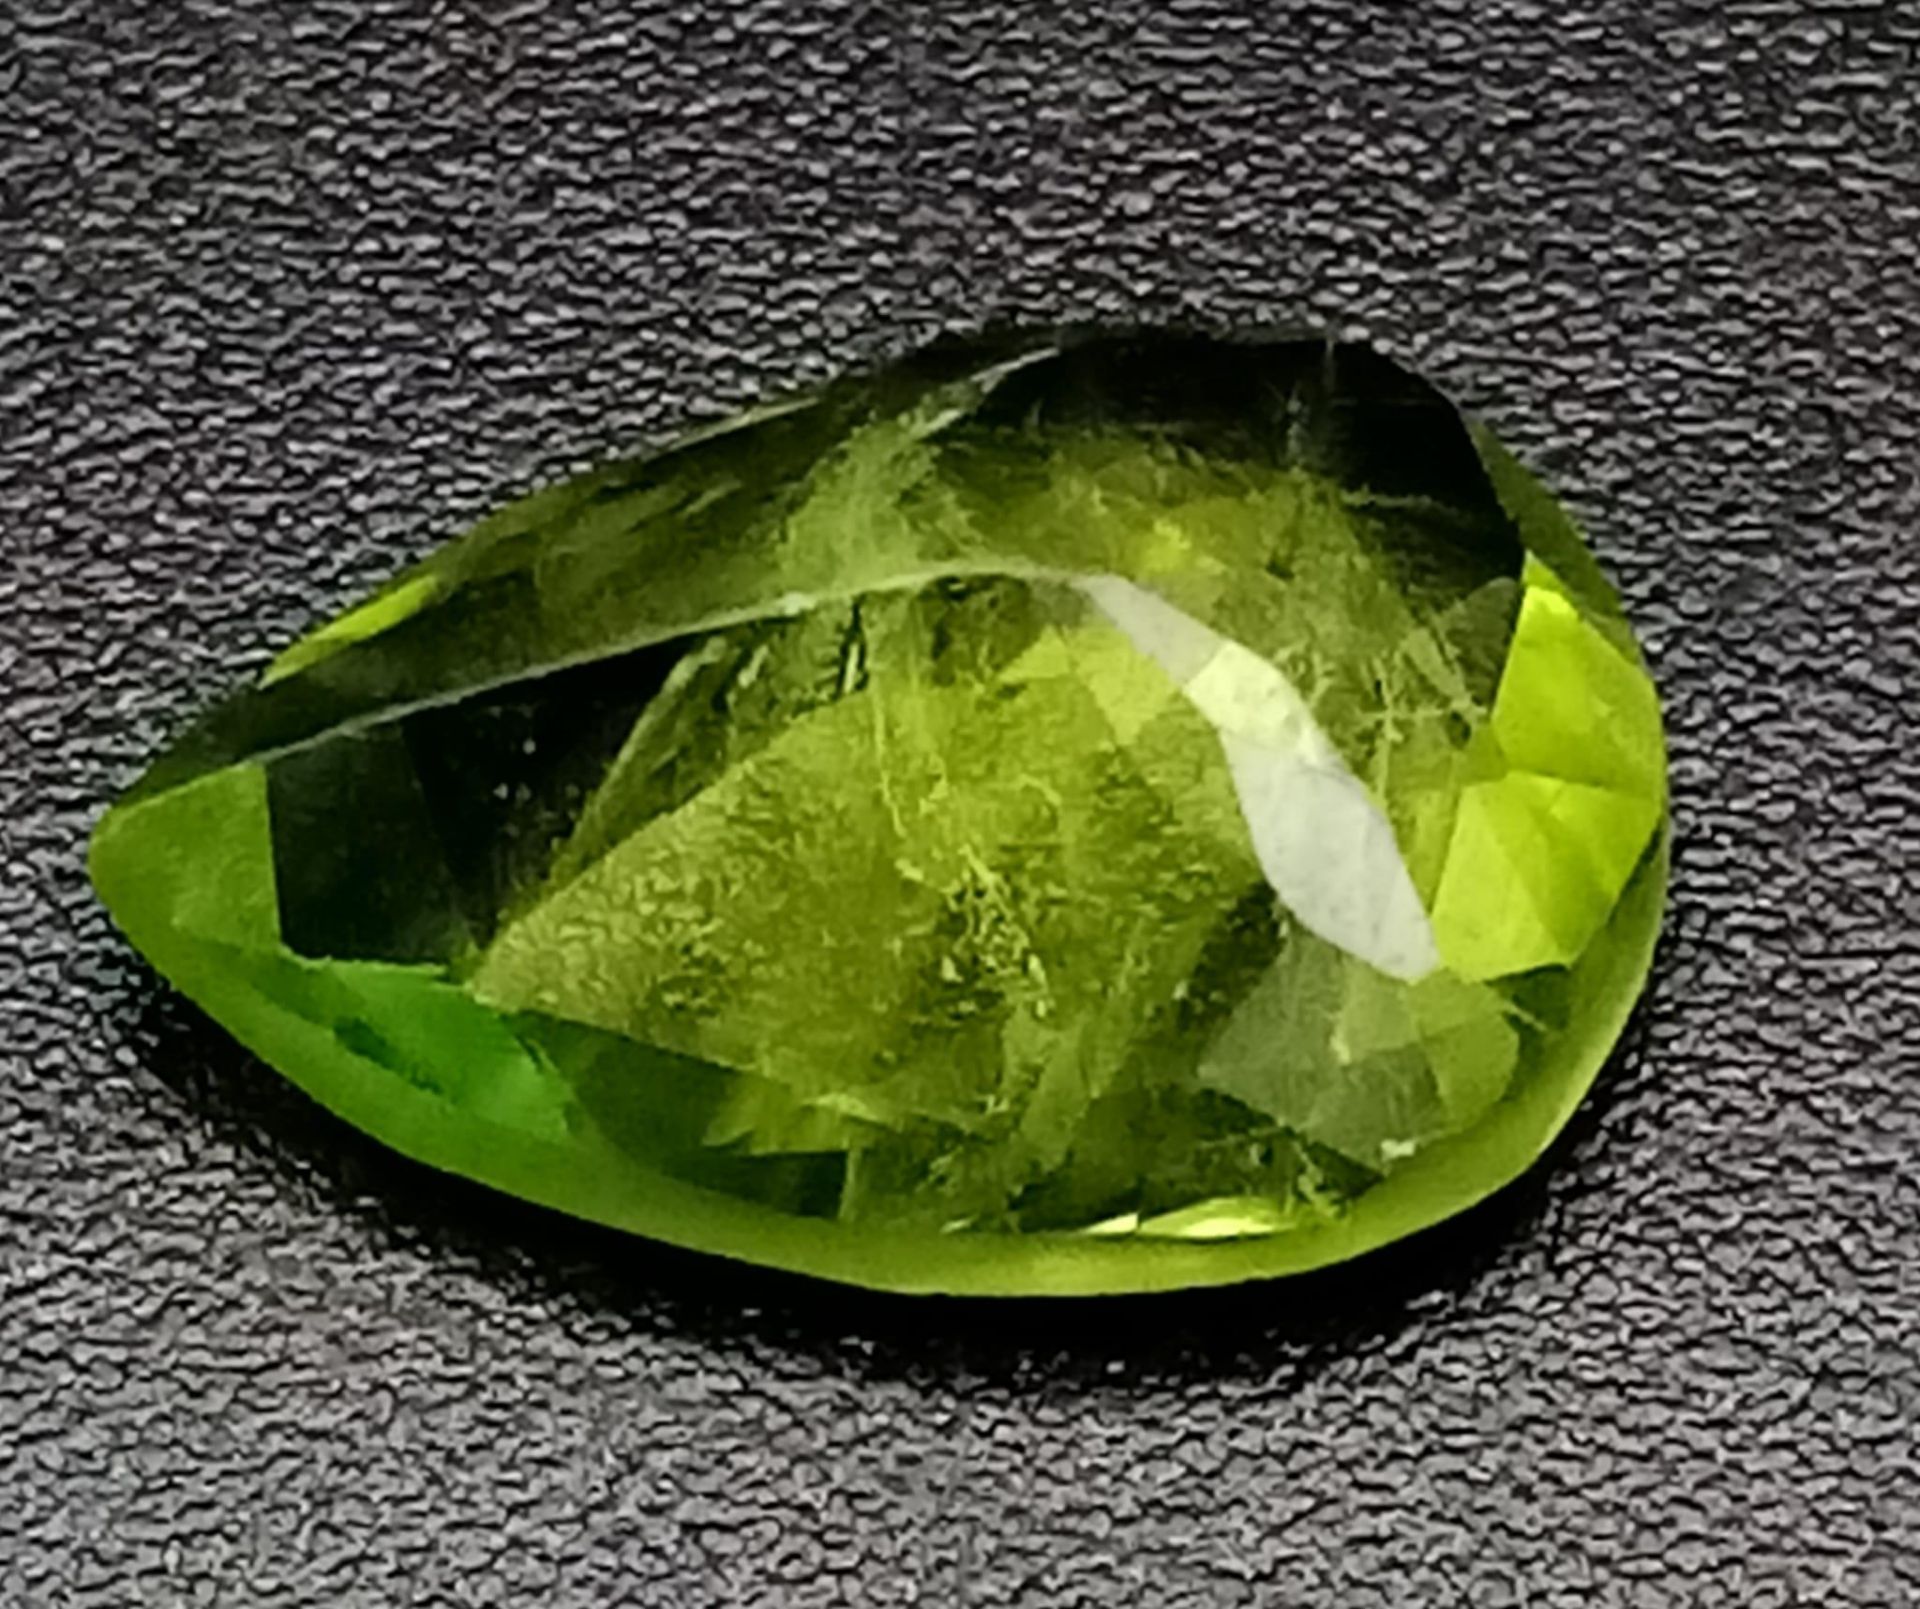 A 2.53ct Pakistani Peridot Gemstone. Pear shaped and comes with a GFCO Swiss Certificate. - Image 2 of 4